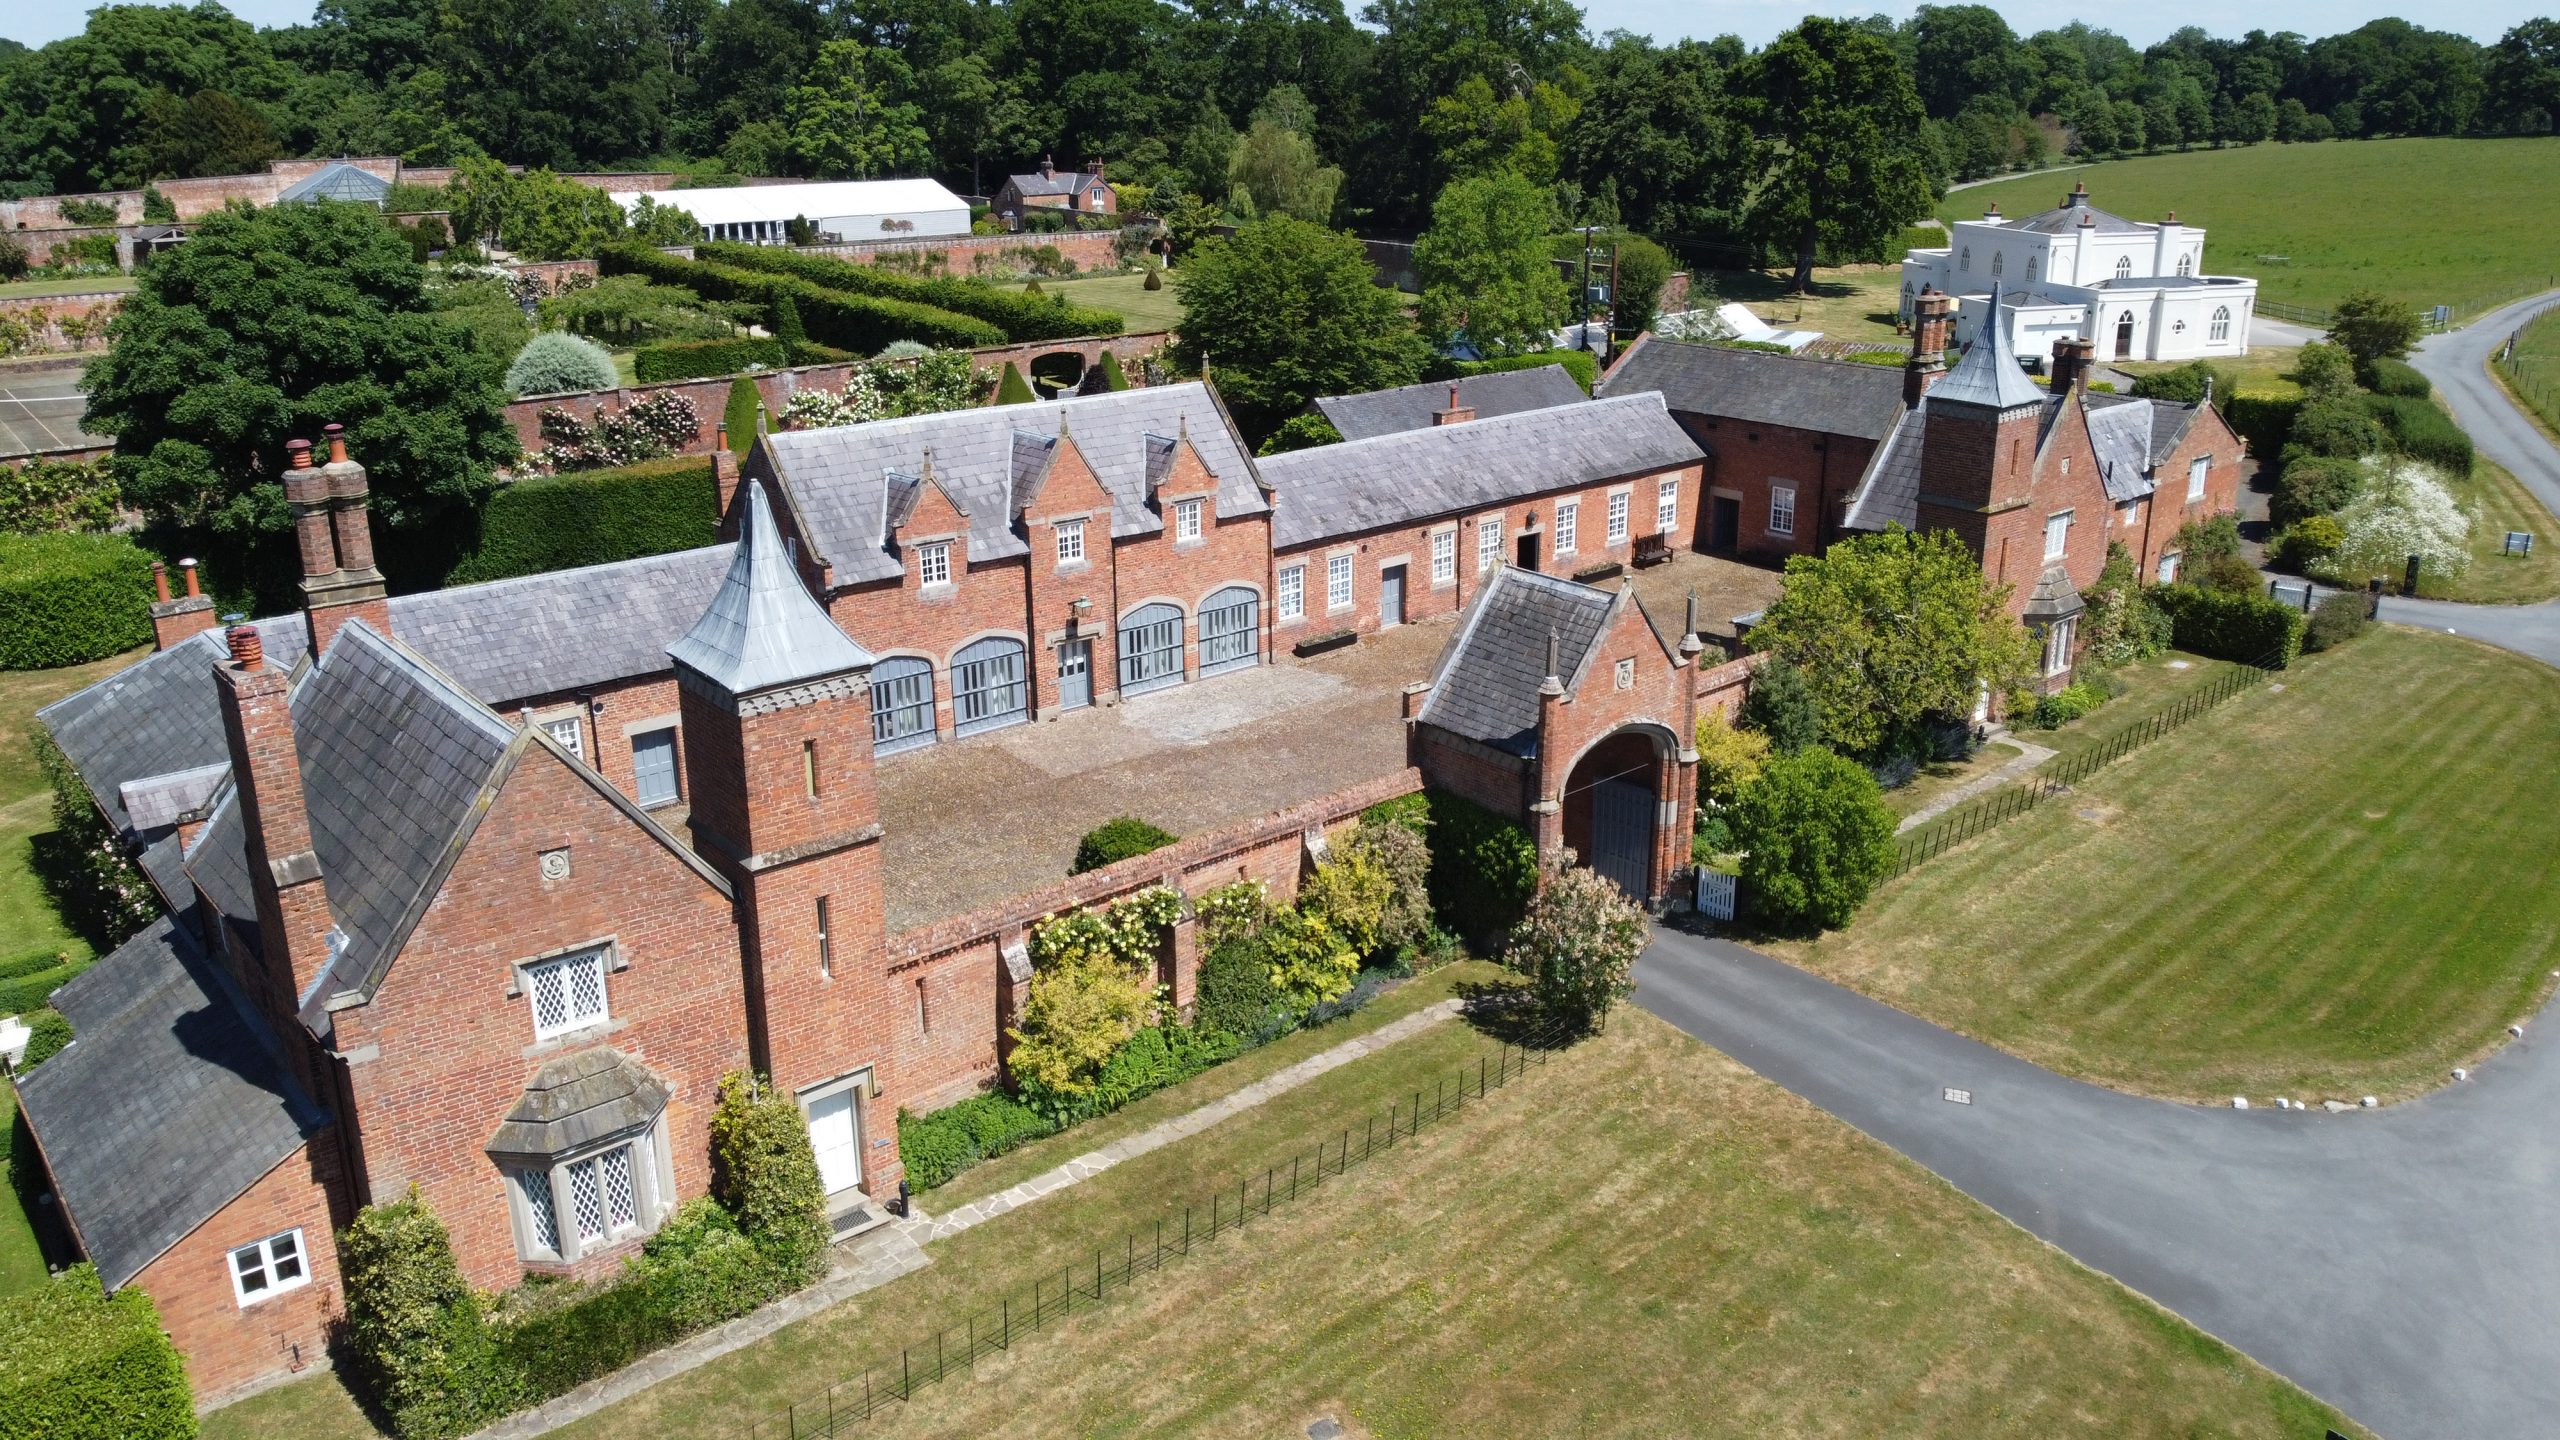 Wedding venue with accommodation in Cheshire